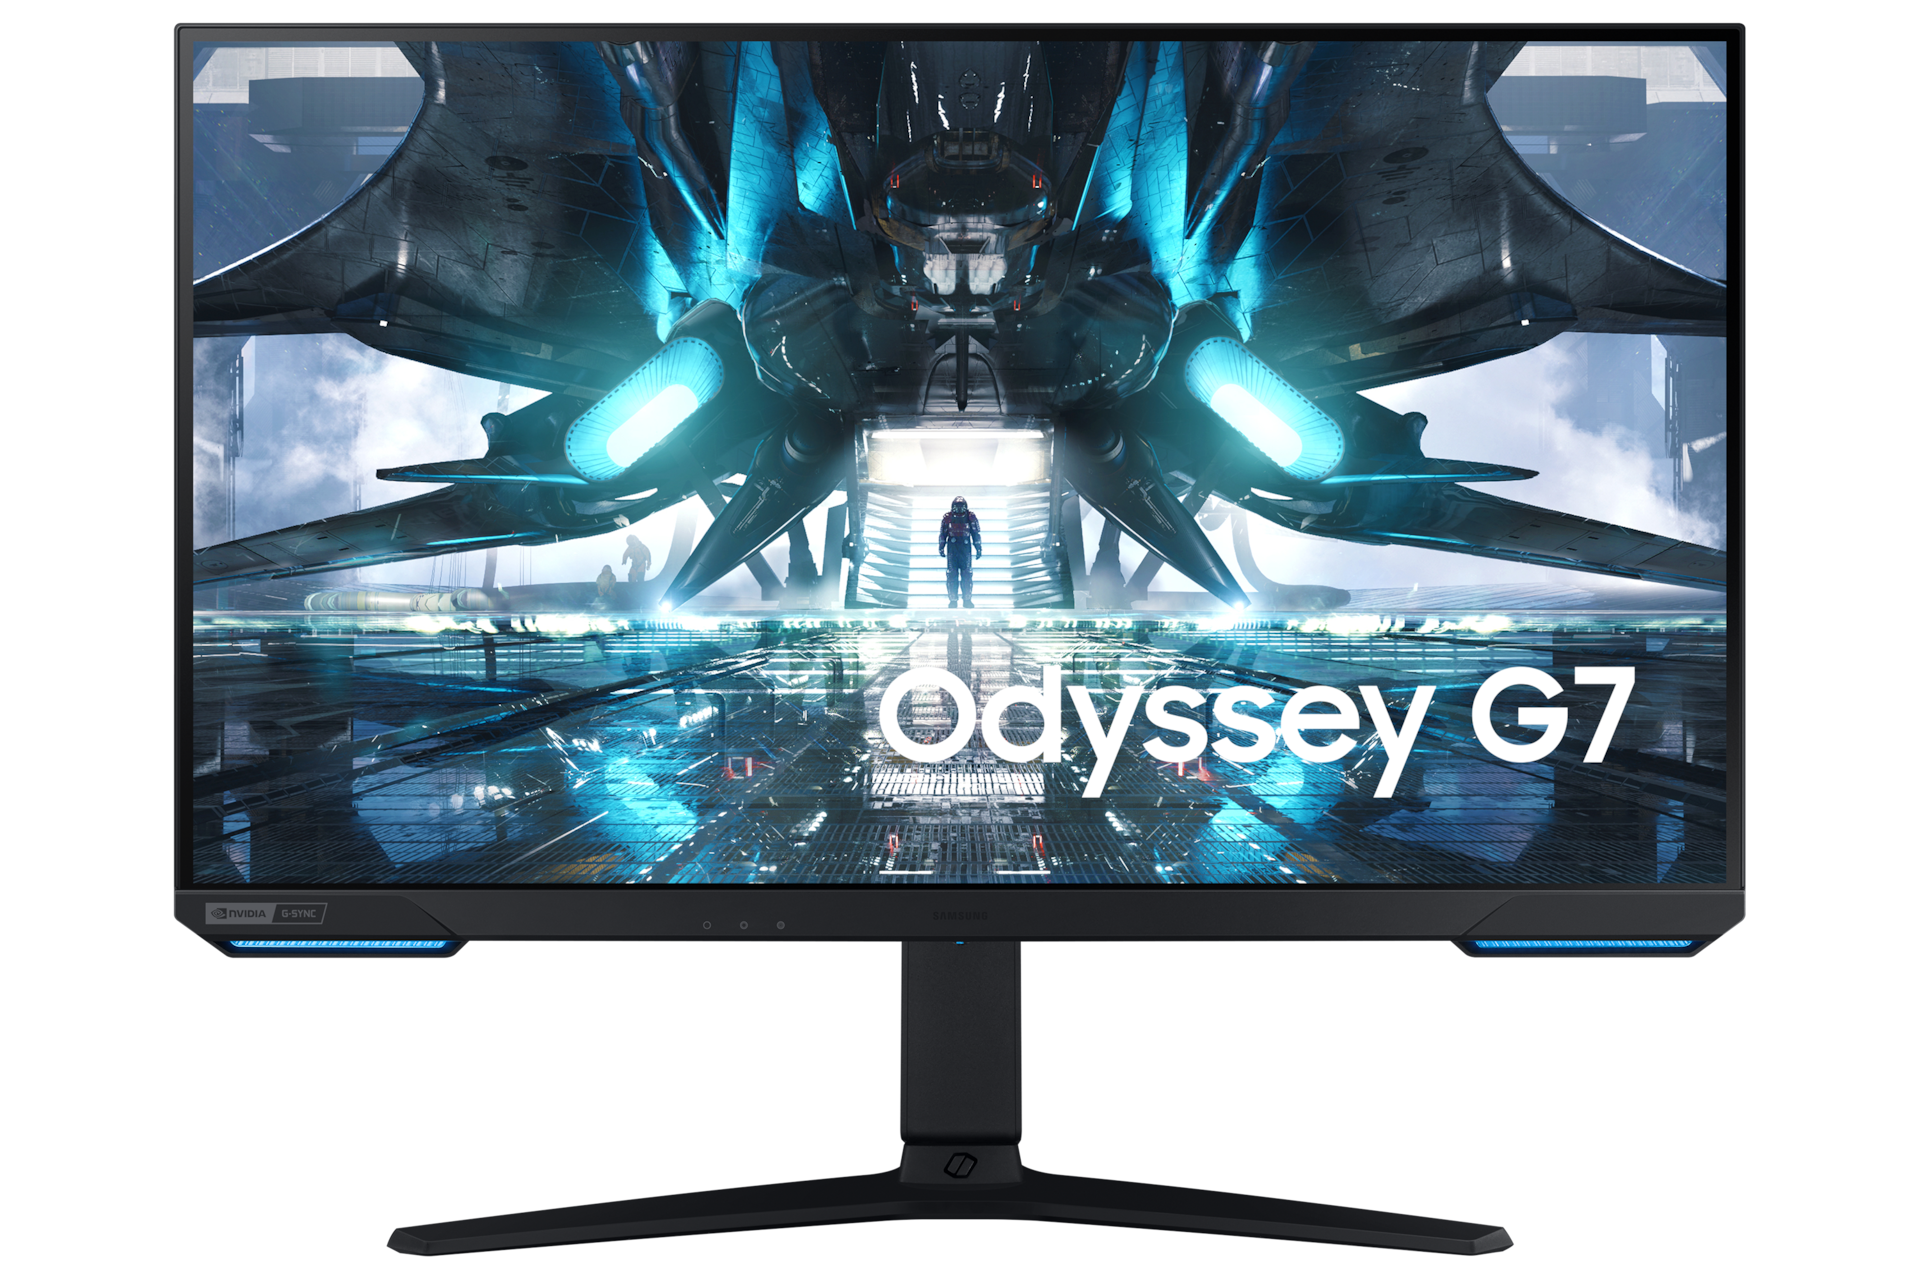 28 Gaming Monitor With UHD resolution and 144hz refresh rate